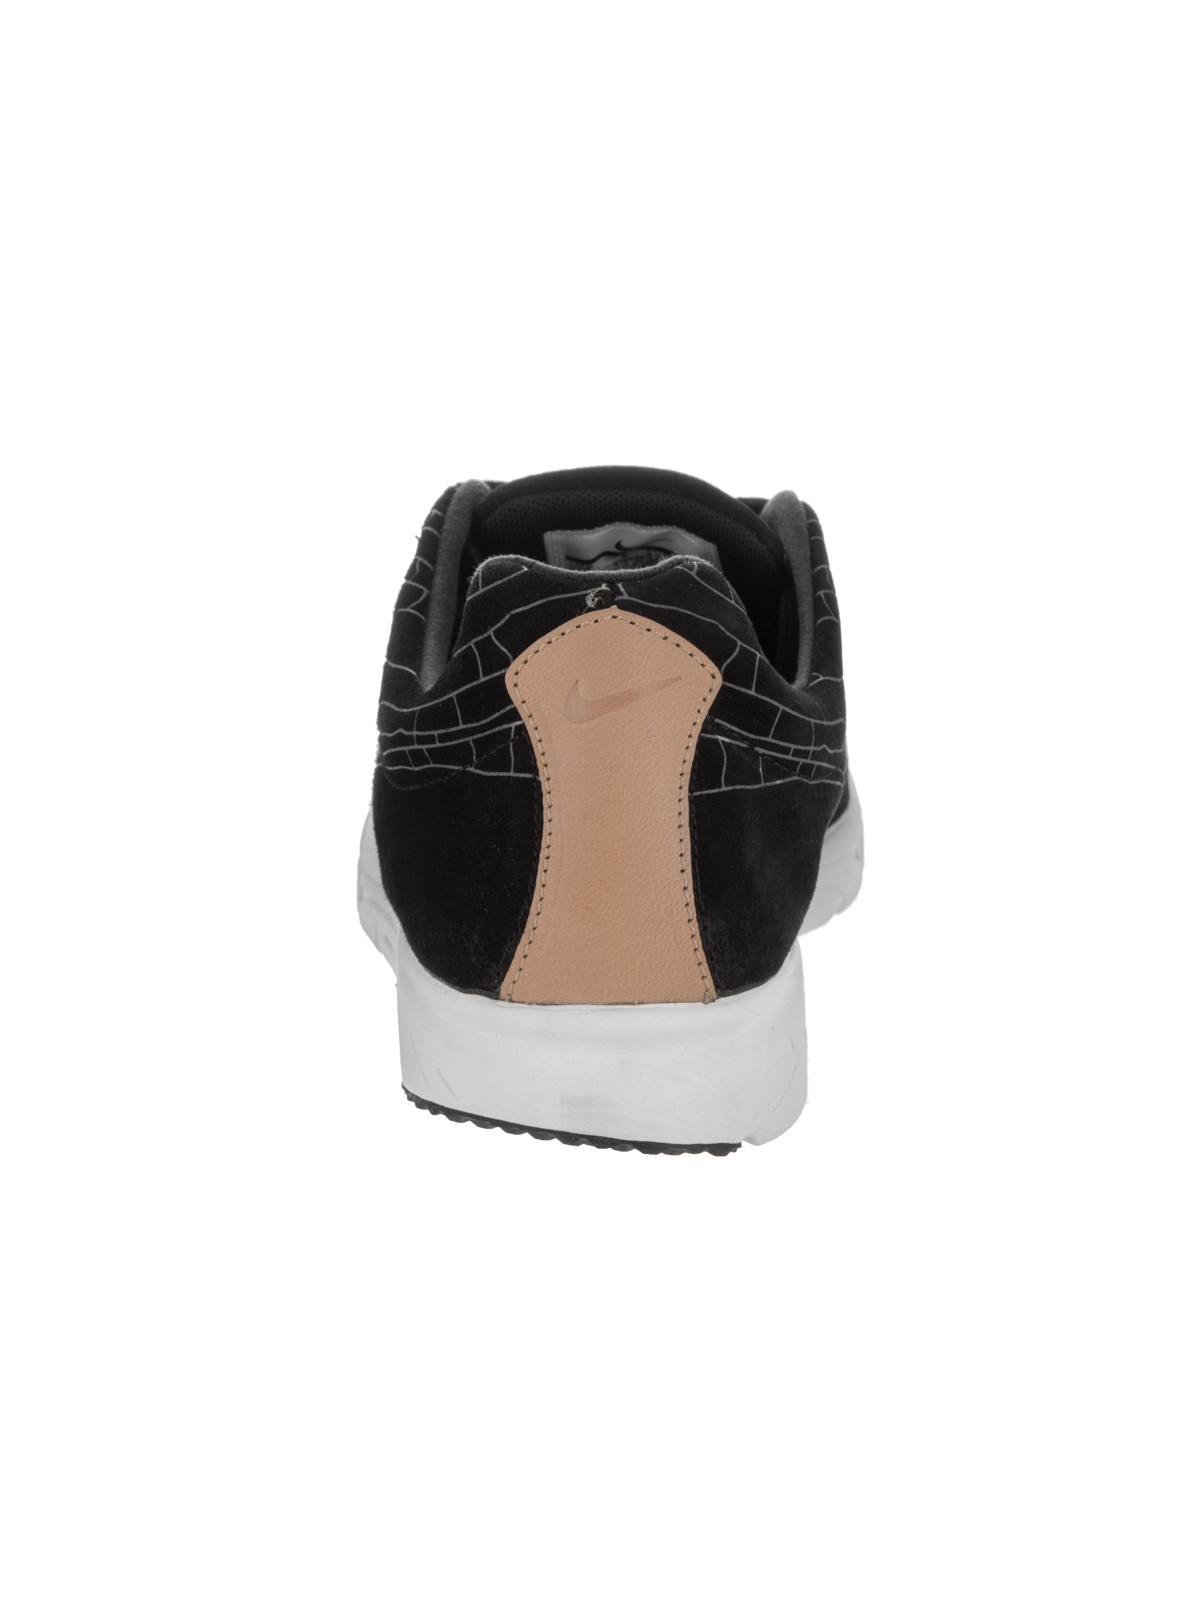 Men's Mayfly Leather Prm Casual Shoe - image 4 of 5